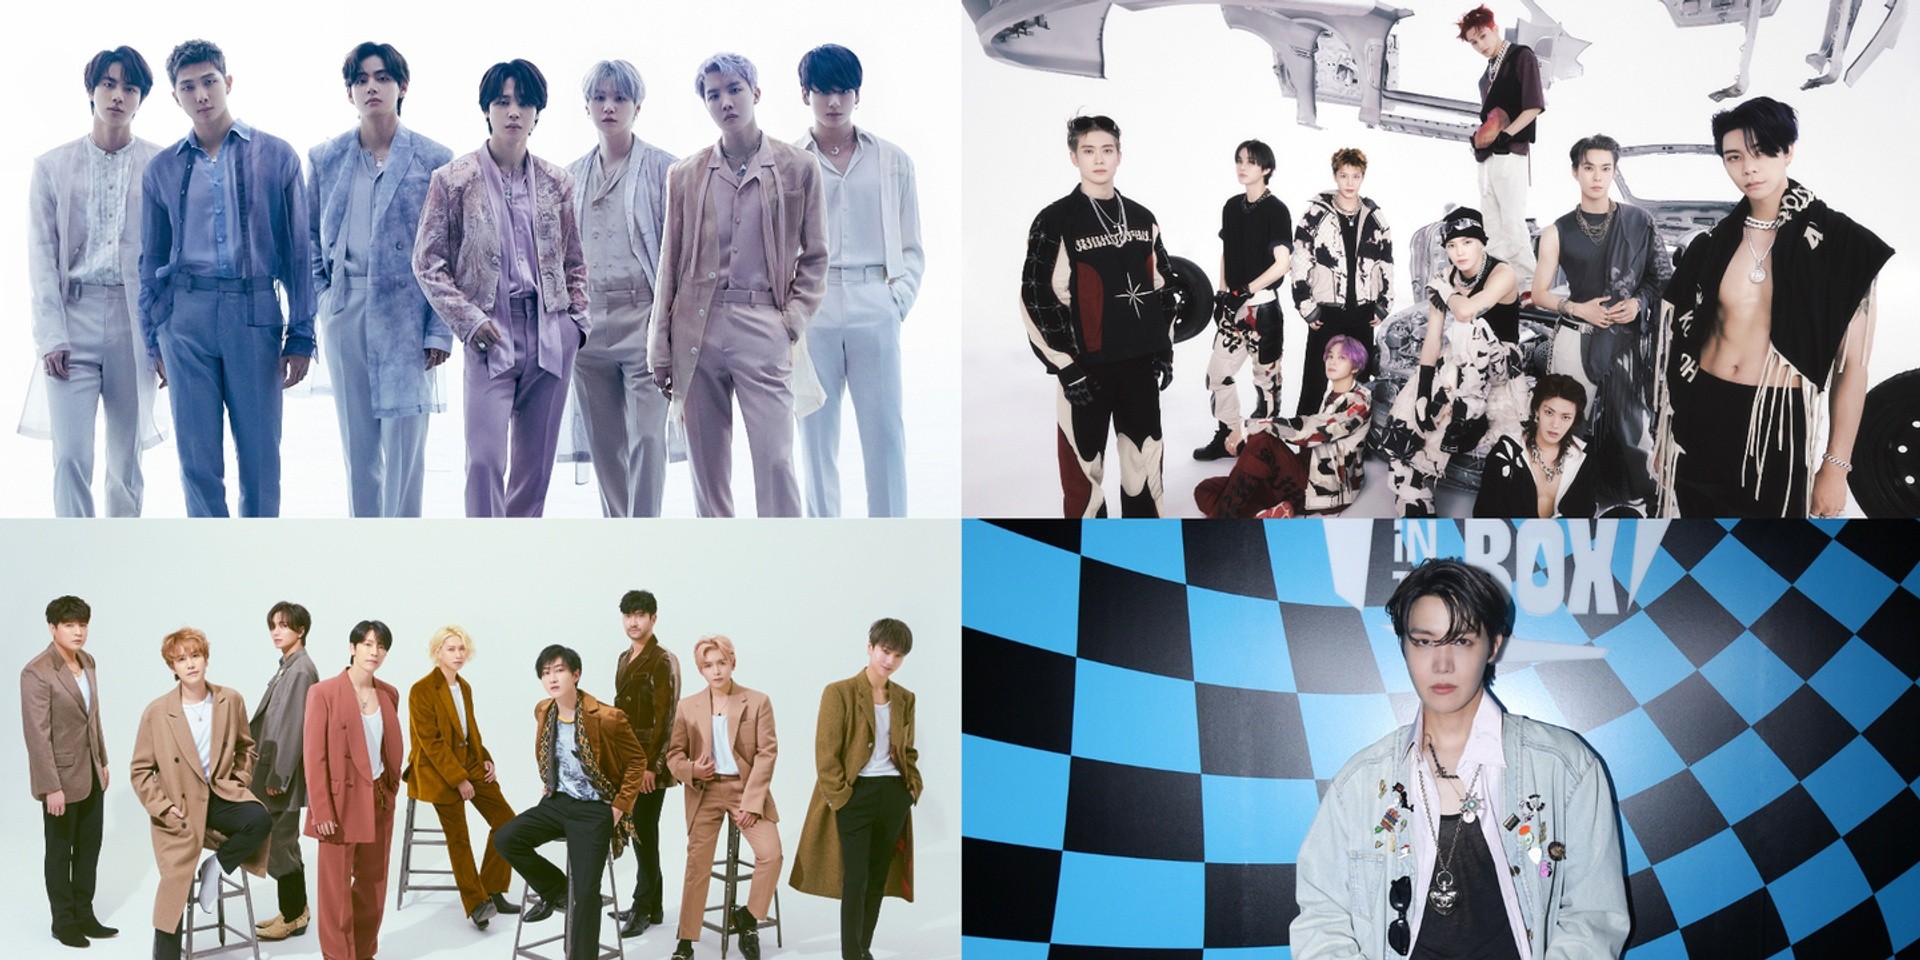 BTS MONUMENTS: BEYOND THE STAR, NCT 127 The Lost Boys, SUPER JUNIOR: THE LAST MAN STANDING, j-hope Solo Documentary, and more are coming to Disney+ in 2023